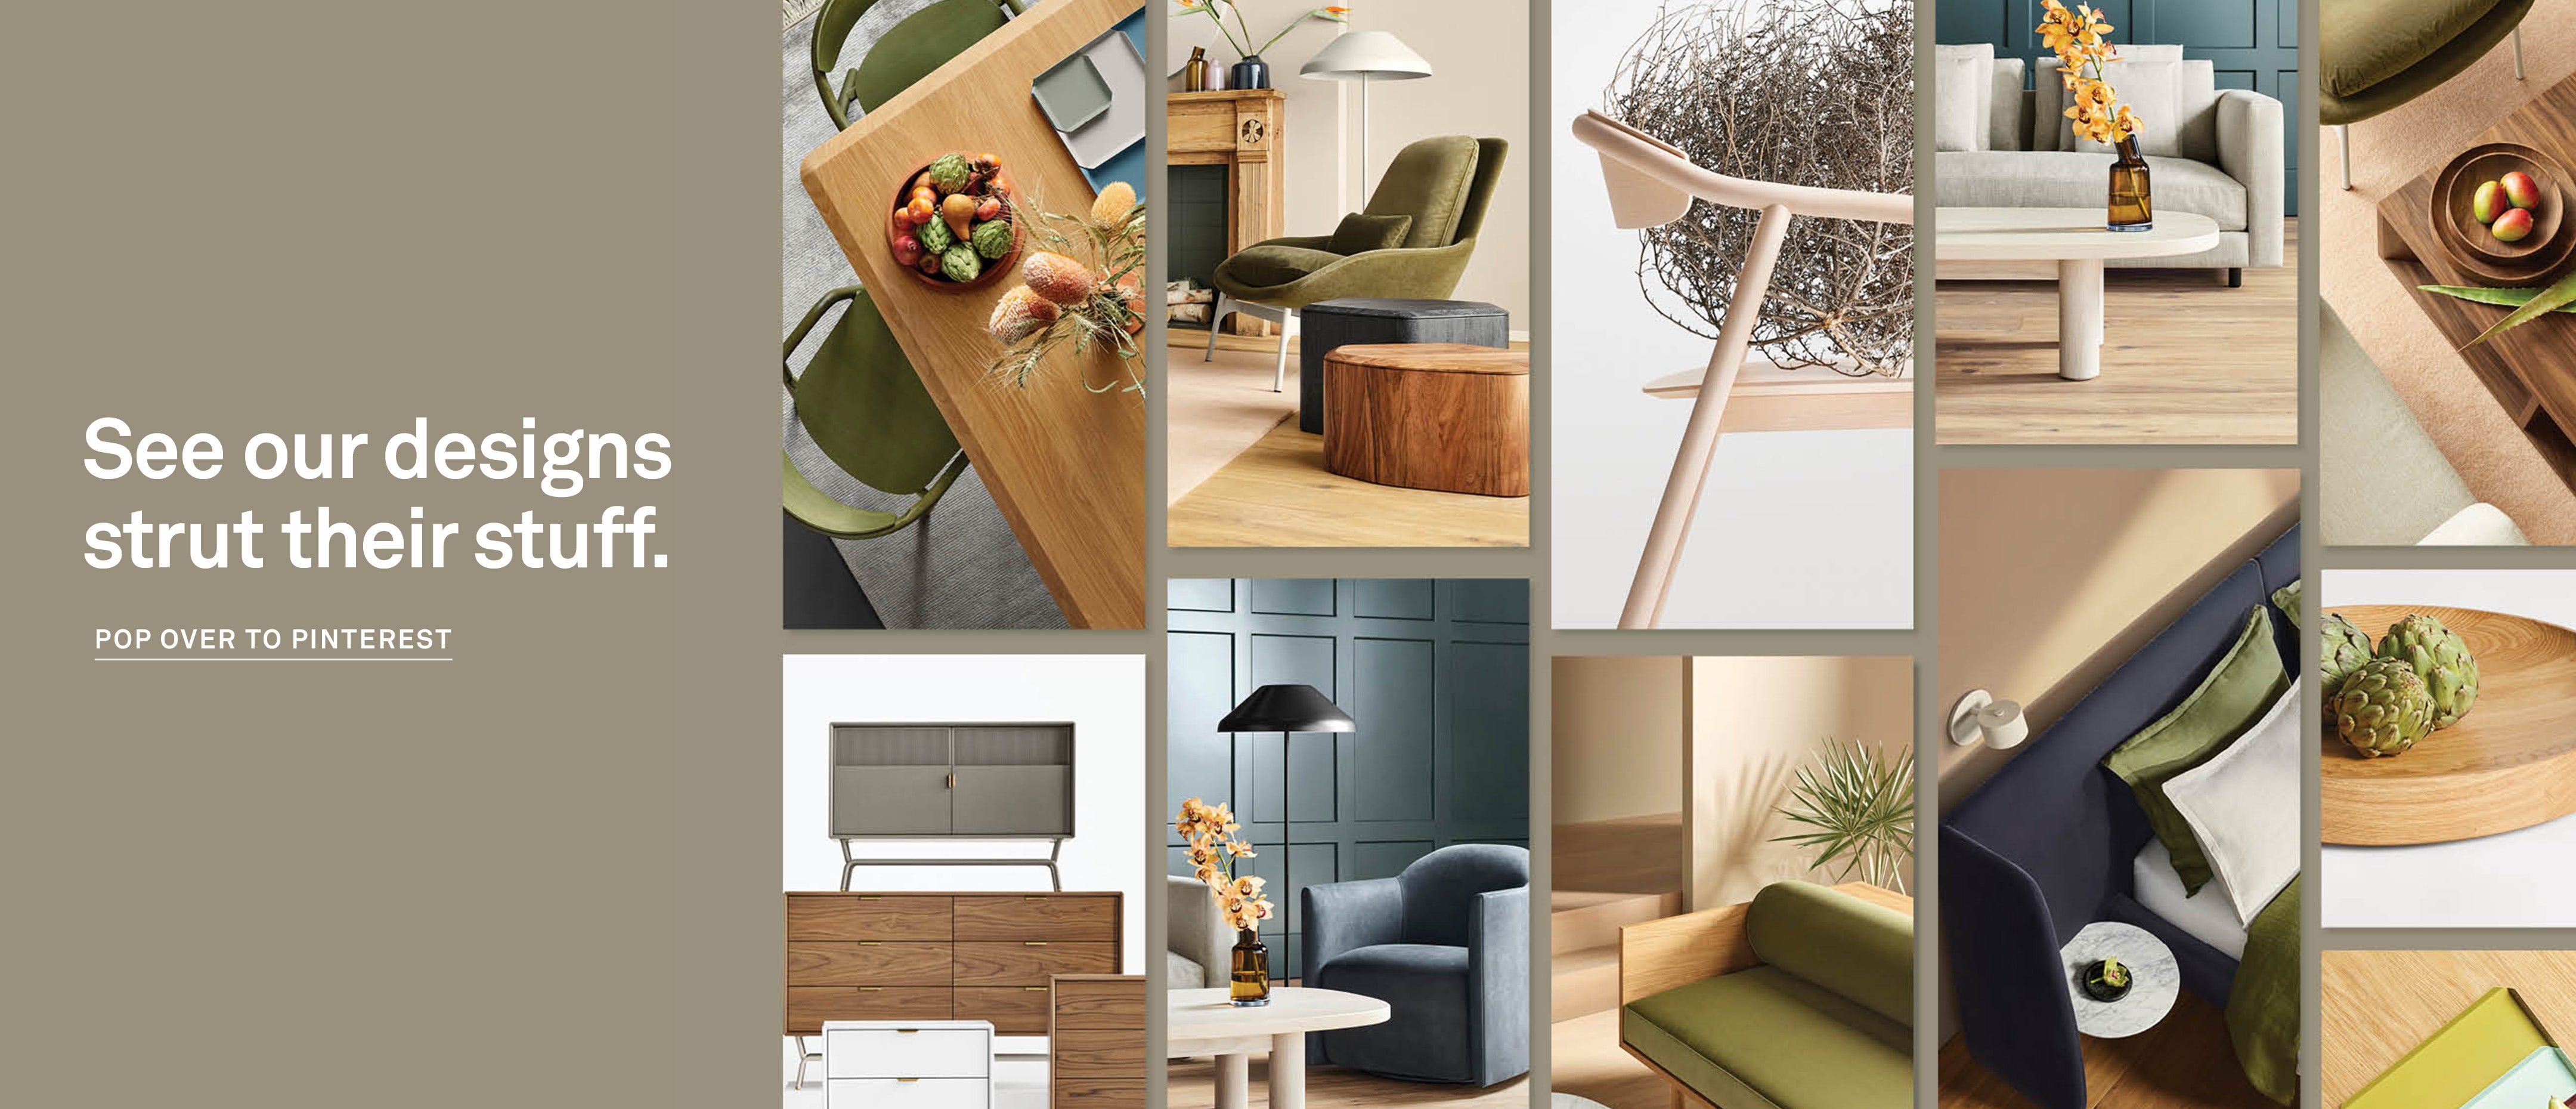 See our designs strut their stuff. Pop over to Pinterest. Collage of Blu Dot furniture.